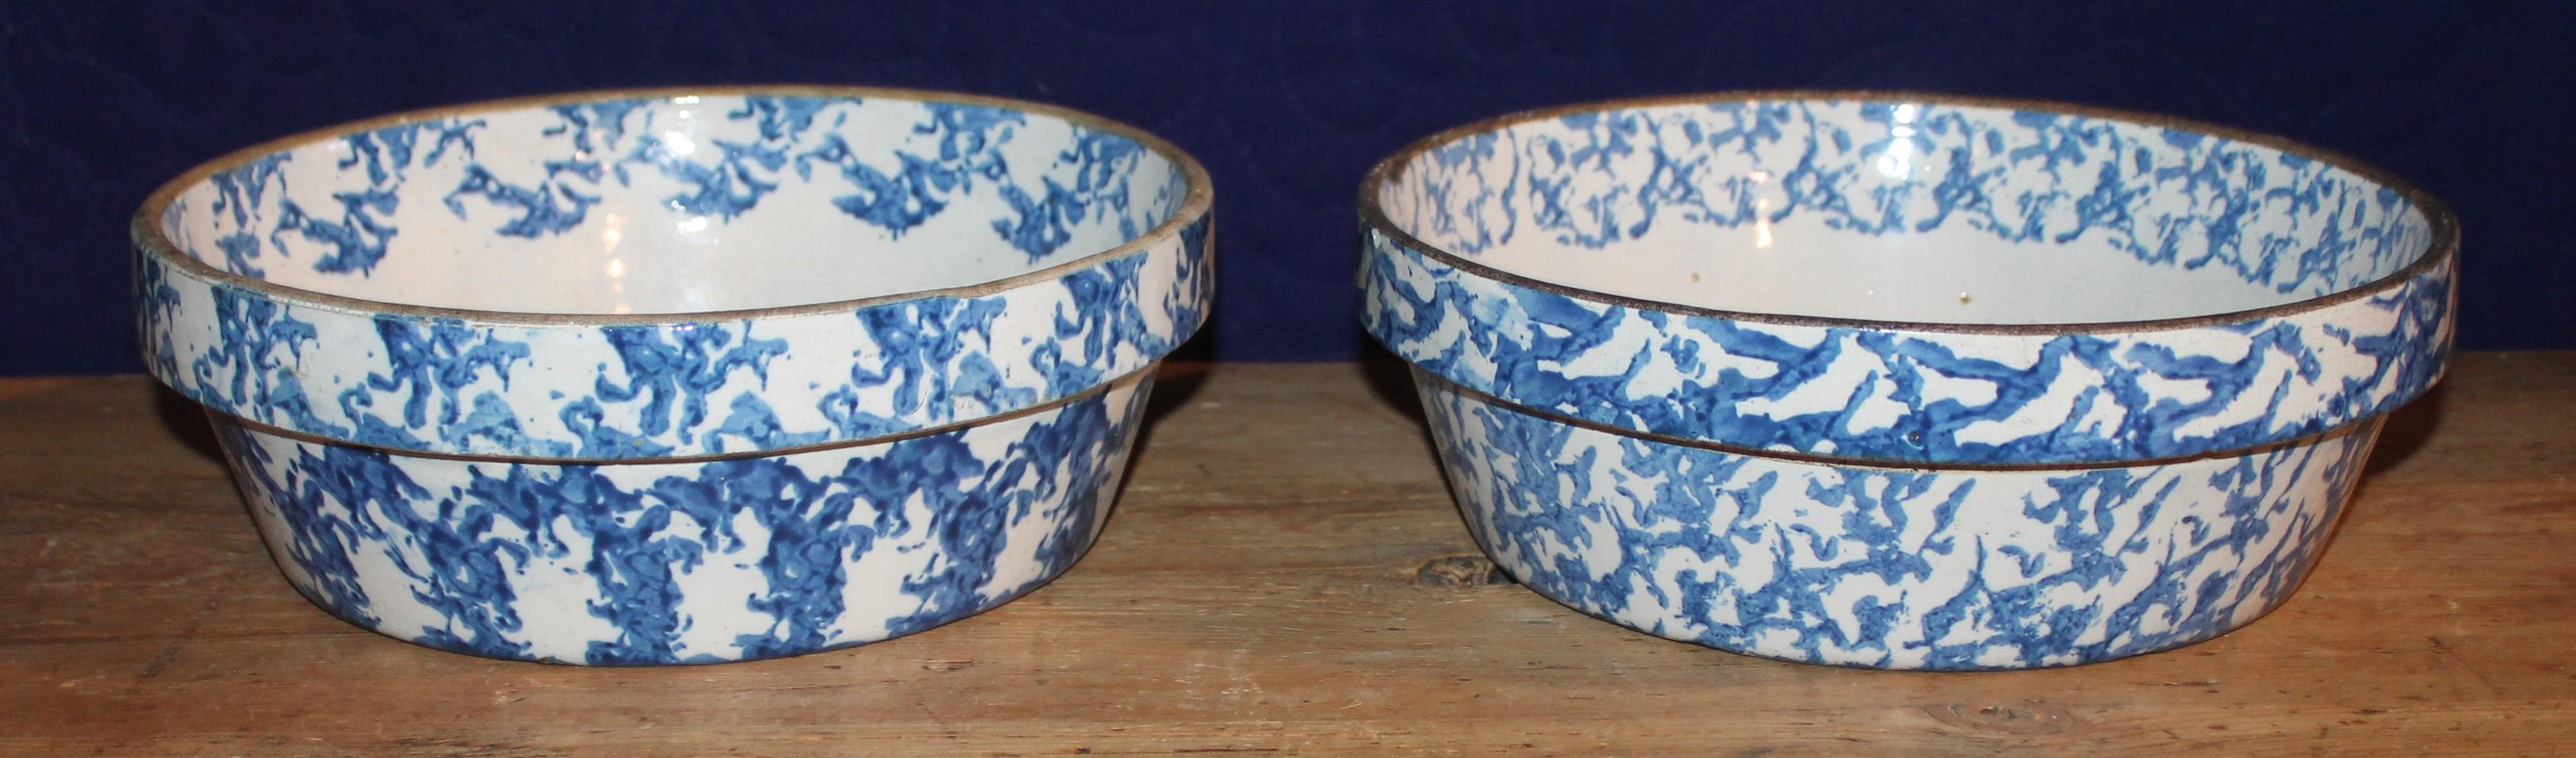 American Classical Collection of Five 19th C Spongeware Mixing Pottery Bowls  For Sale